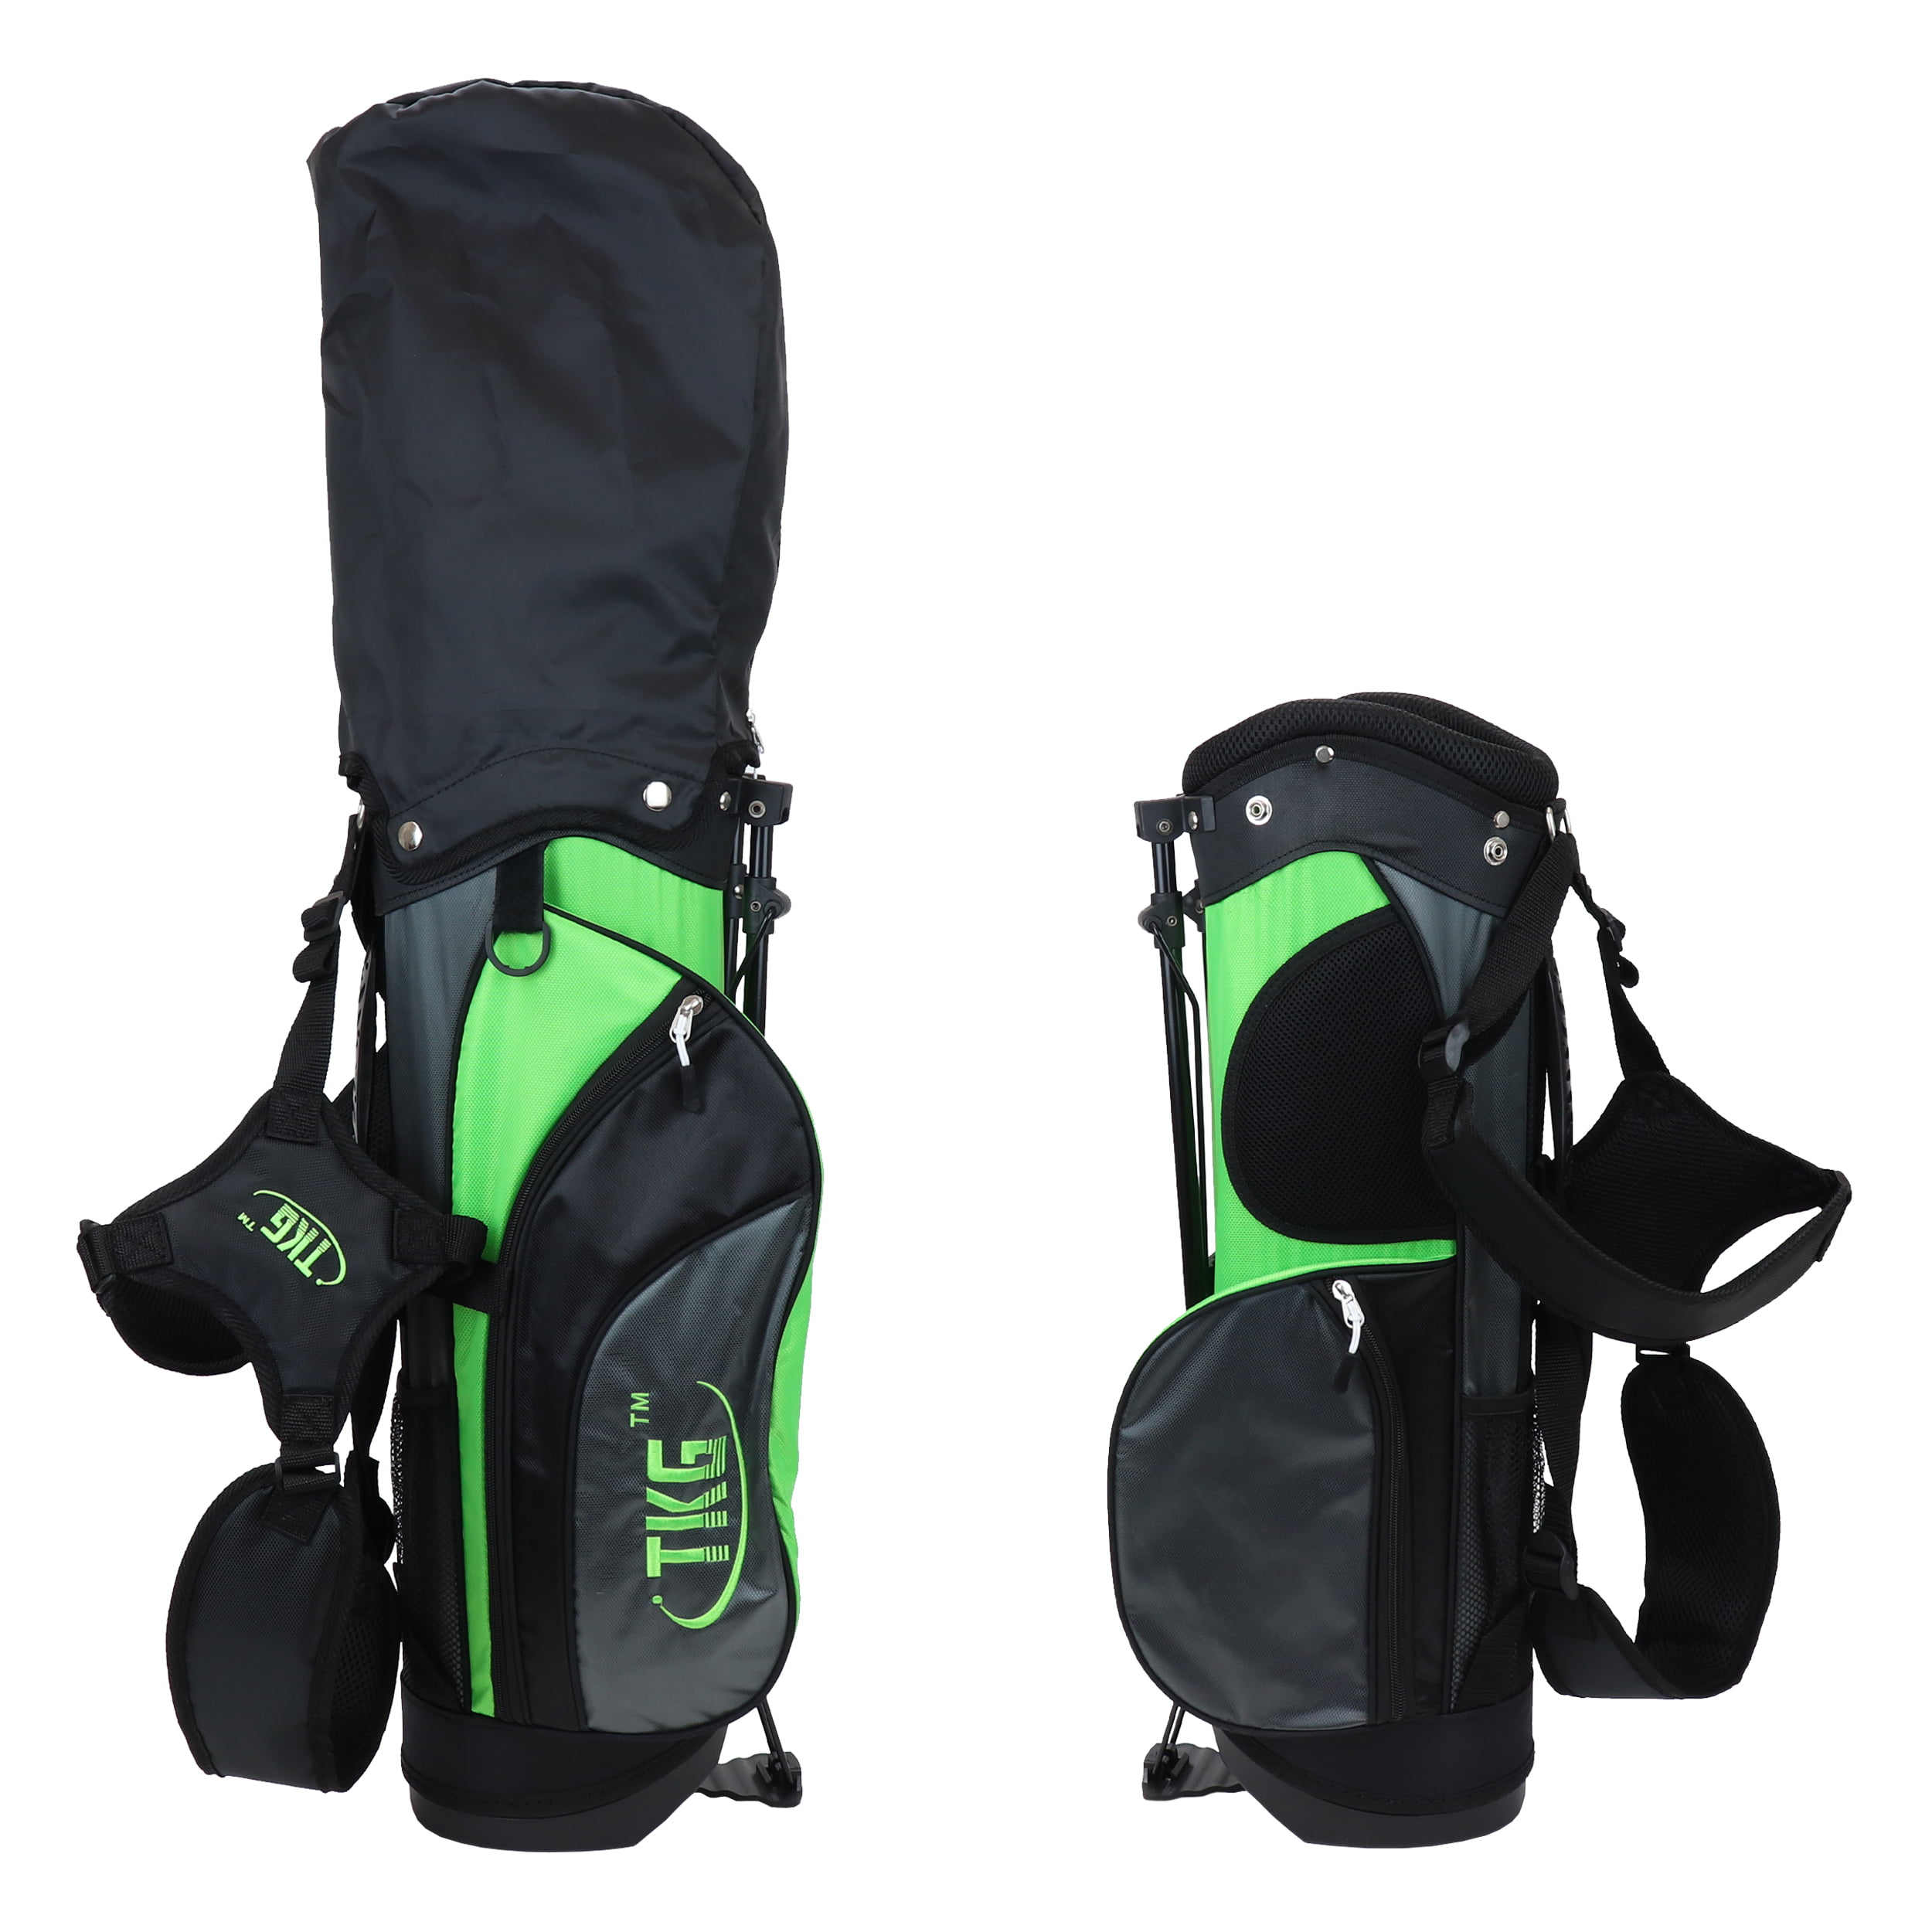 TKG Sports Youth Golf Club Set for Ages 5-8, Golf Stand Bag with Rain Hood  and Accessories, Left-Handed